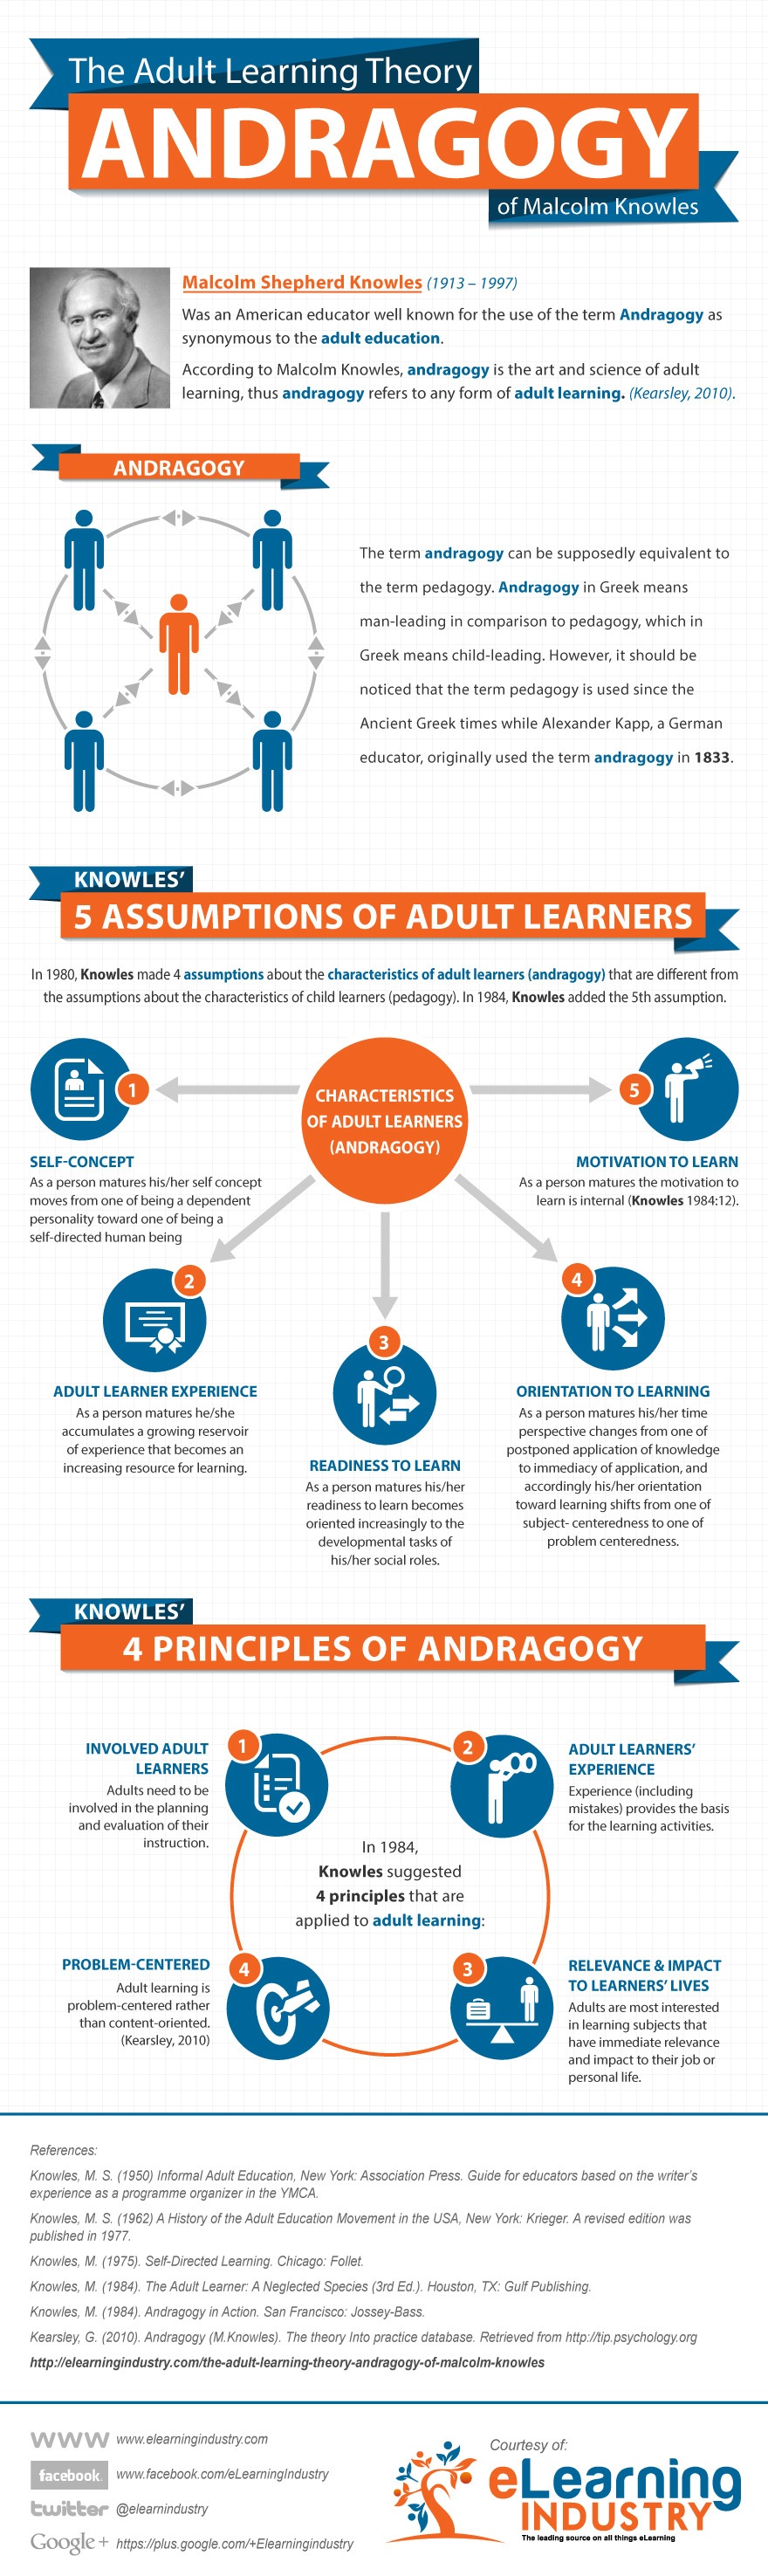 The Adult Learning Theory - Andragogy - Infographic